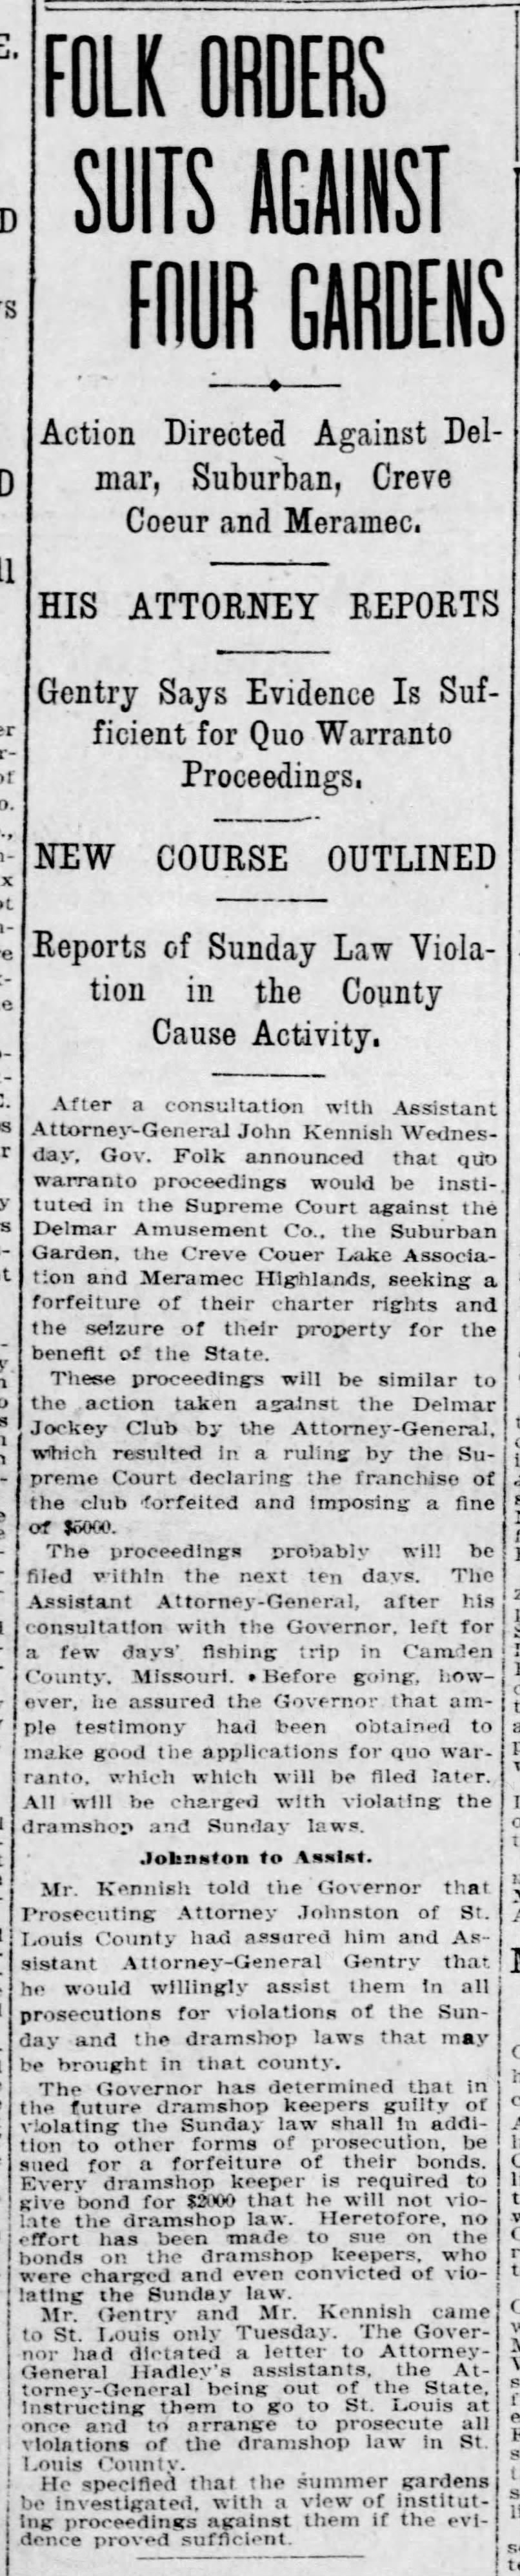 Folk Orders Suits Against Four Gardens, 1906